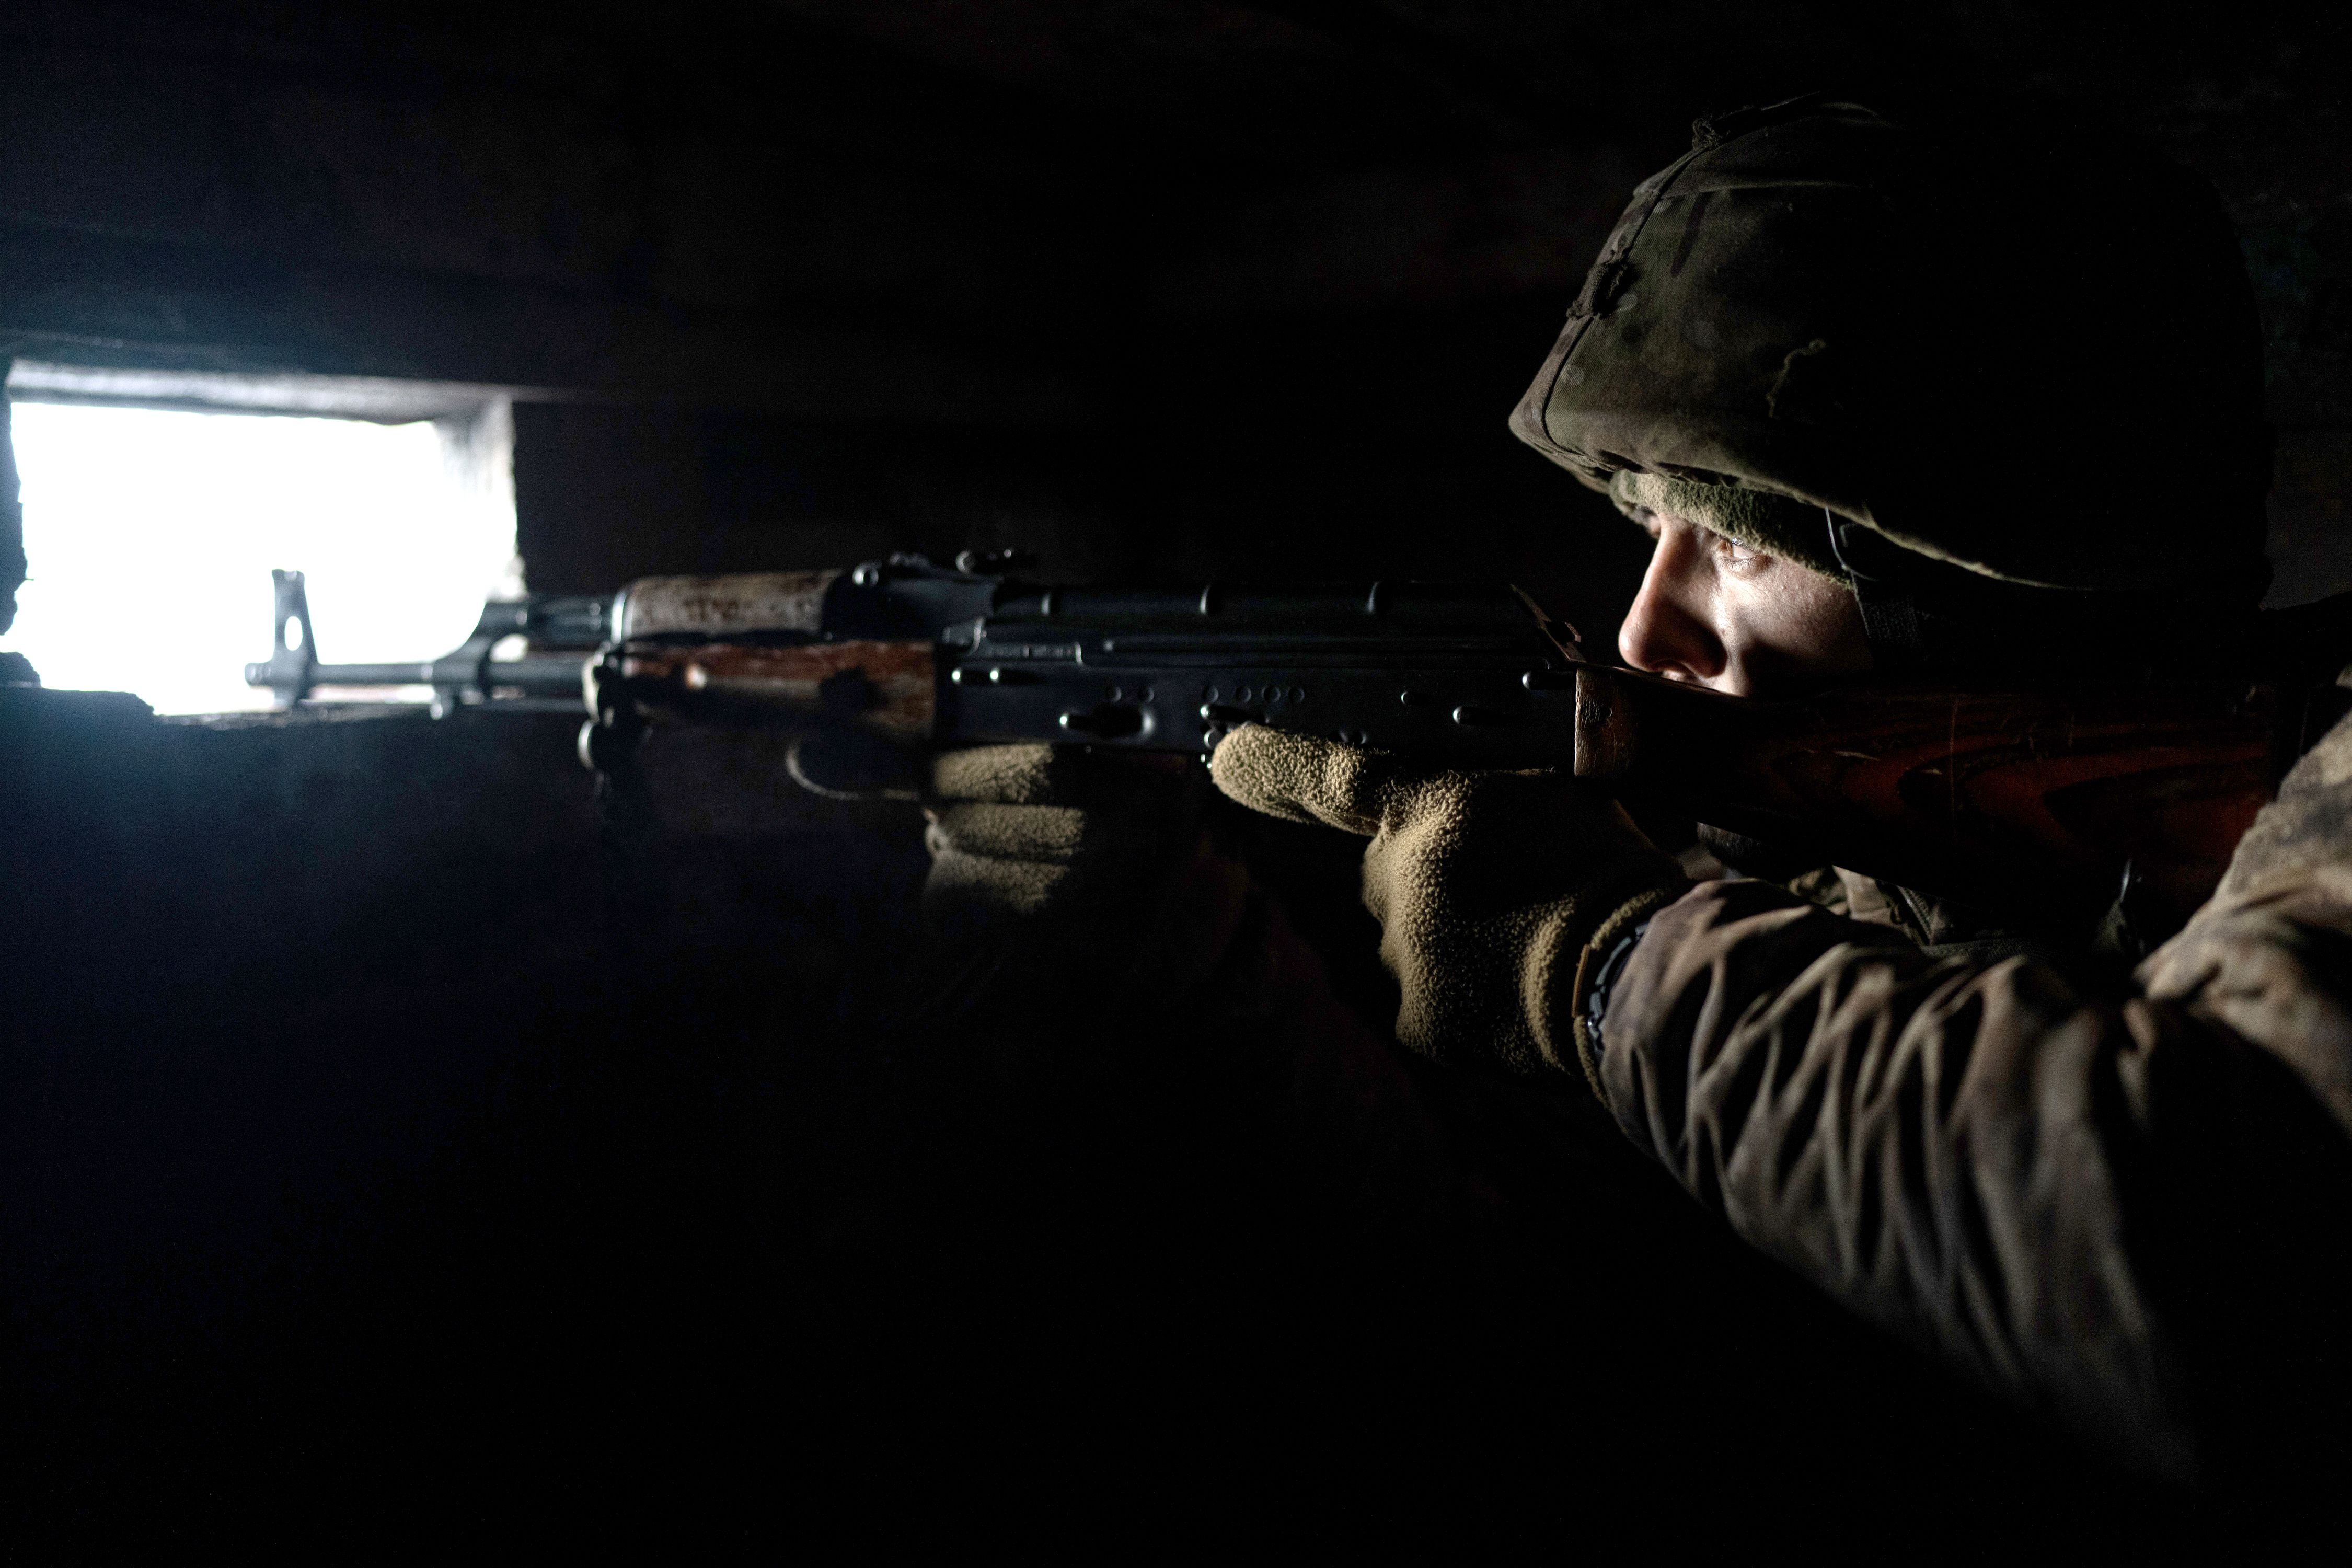  A Ukrainian soldier points his rifle from the frontline in Zolote, Ukraine on January 20.